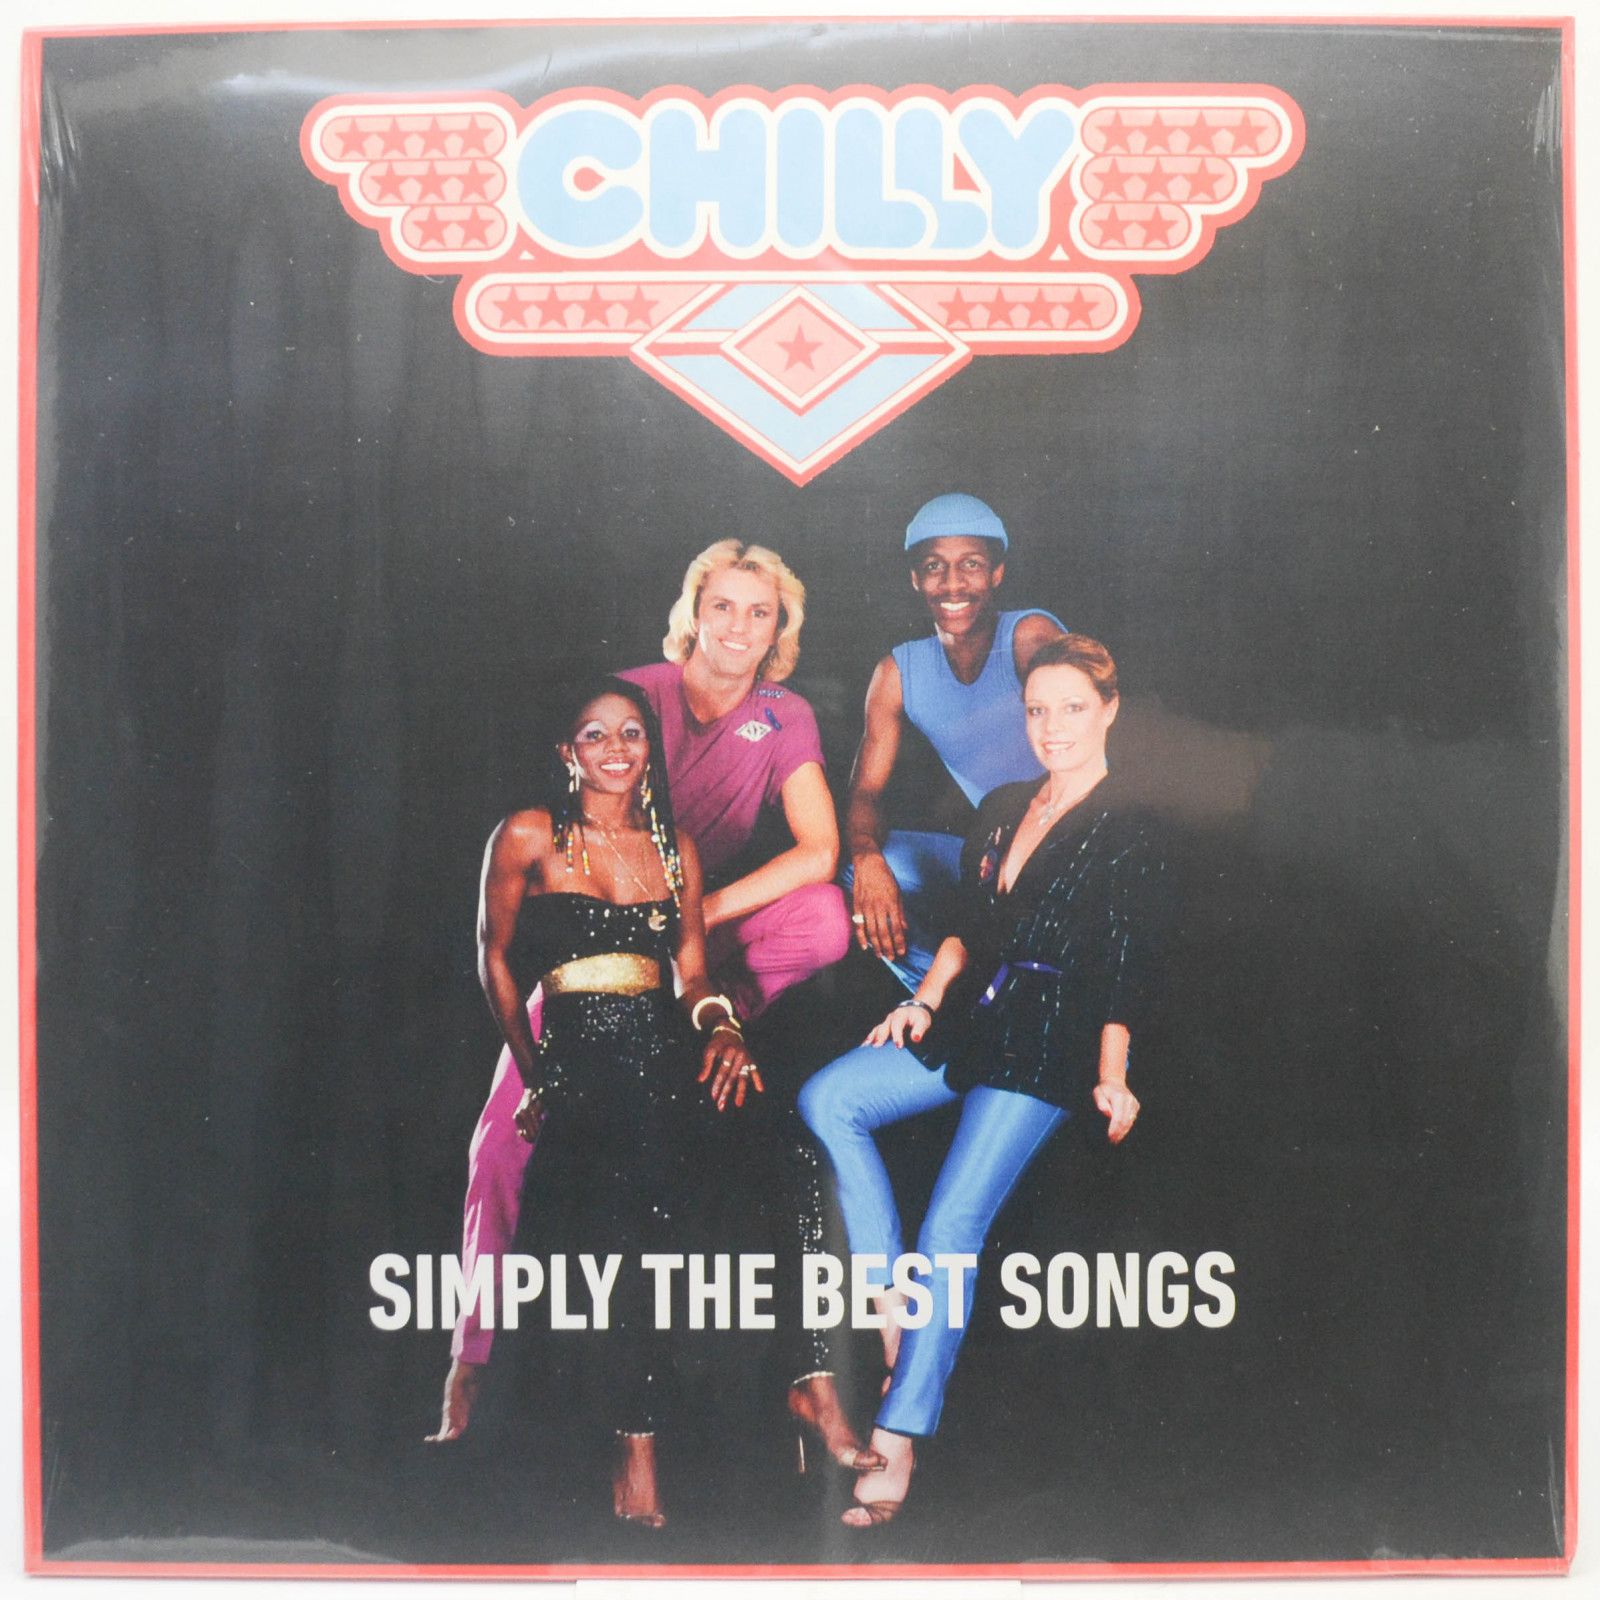 Chilly — Simply The Best Songs, 2015